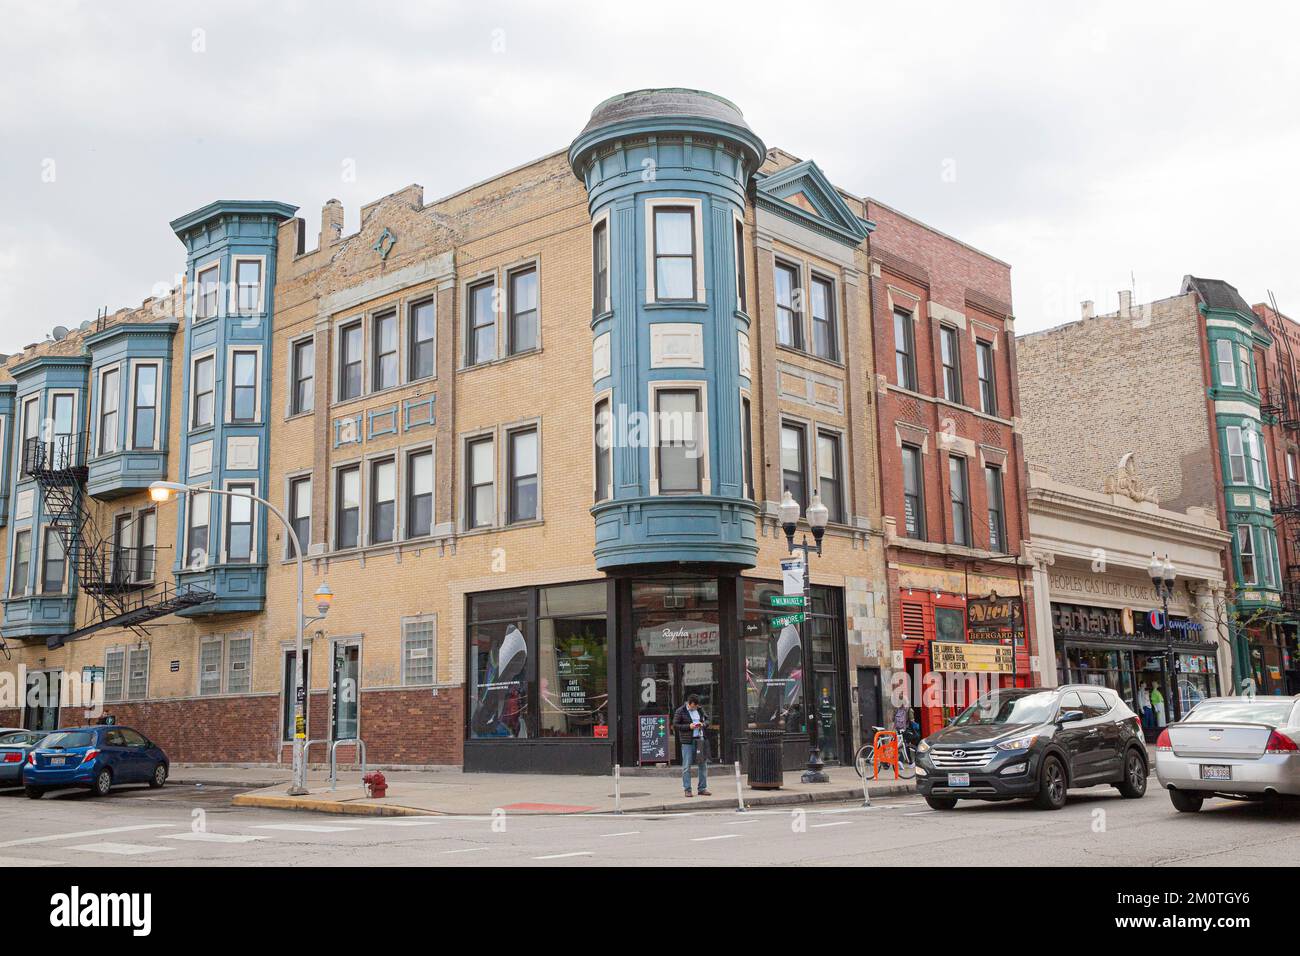 United States, Illinois, Chicago, Milwaukee avenue, in the heart of Wicker Park Stock Photo